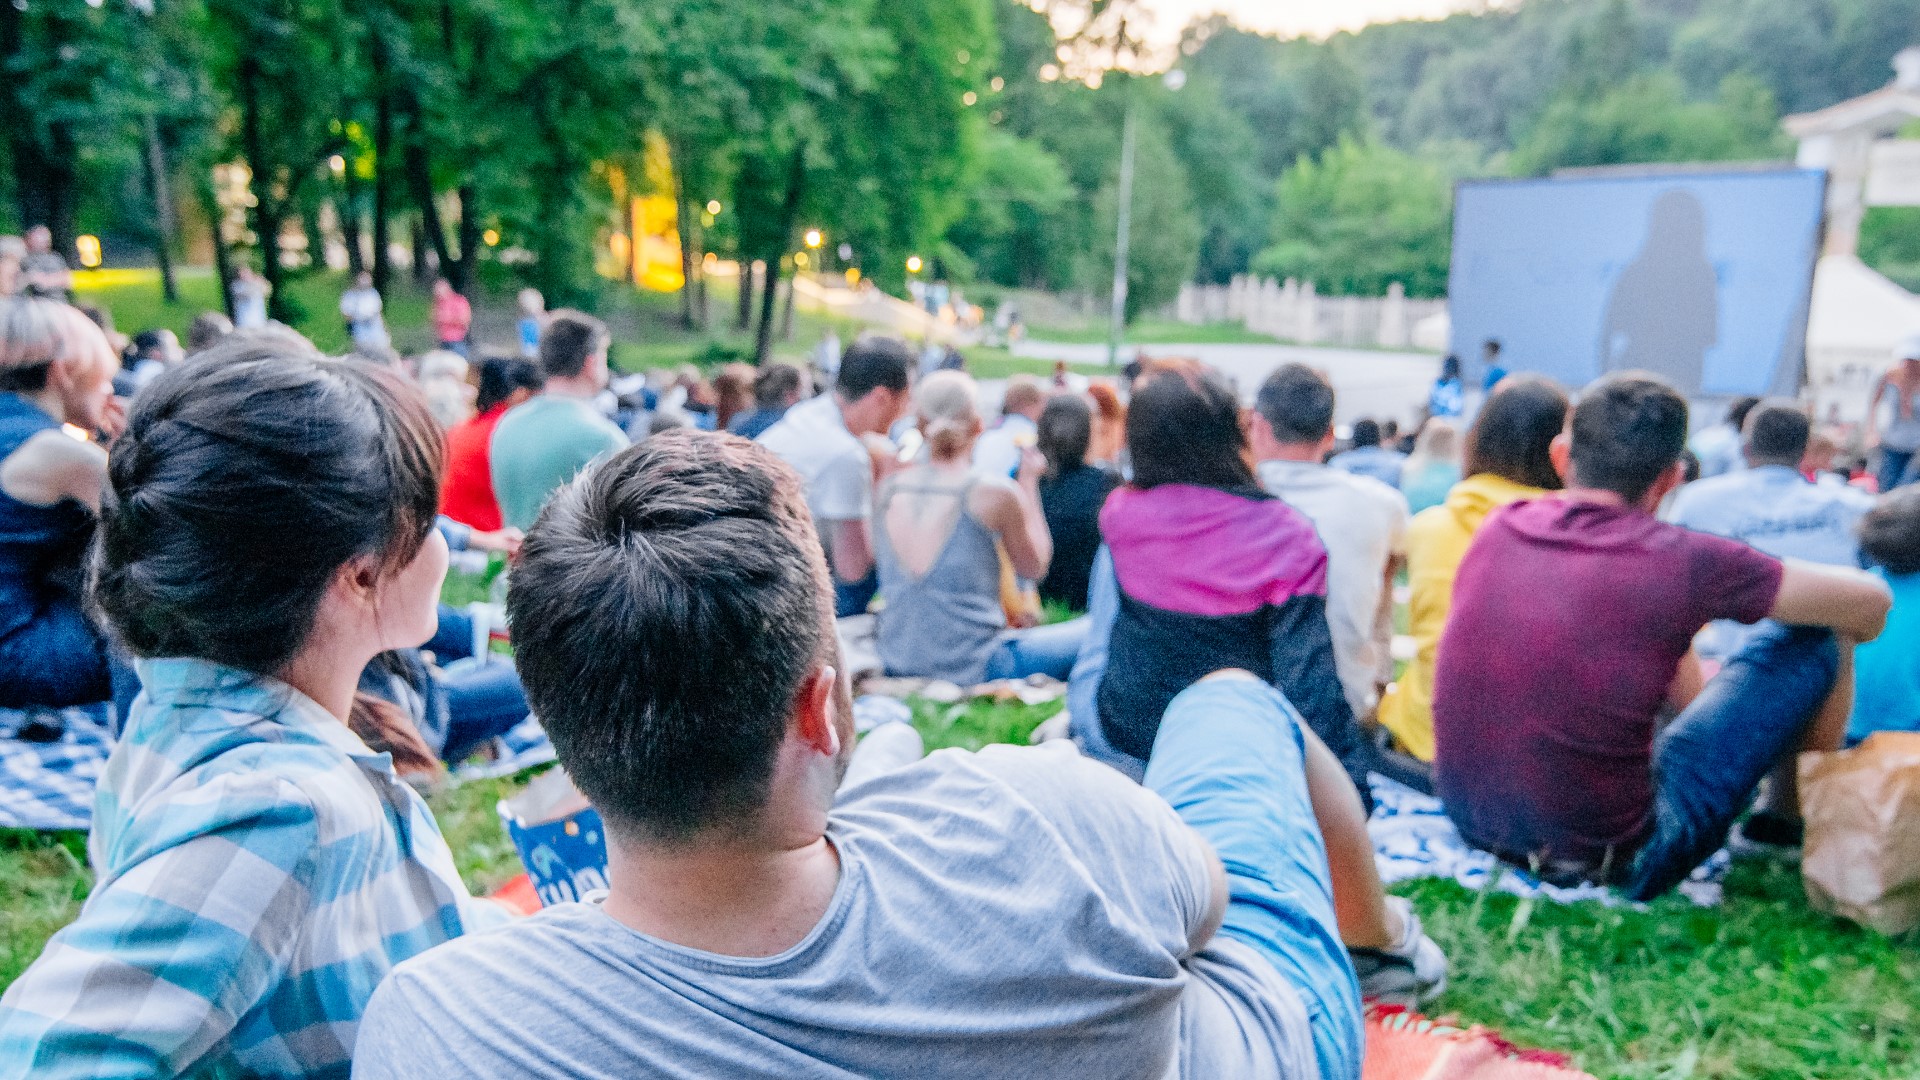 The new Movies in the Neighborhood Park series provides free family entertainment at parks that have been overlooked in the past. Kicking off the series this Saturday, June 22 at Clemente Park, located at 546 Rumsey SW is a showing of "The Grinch."